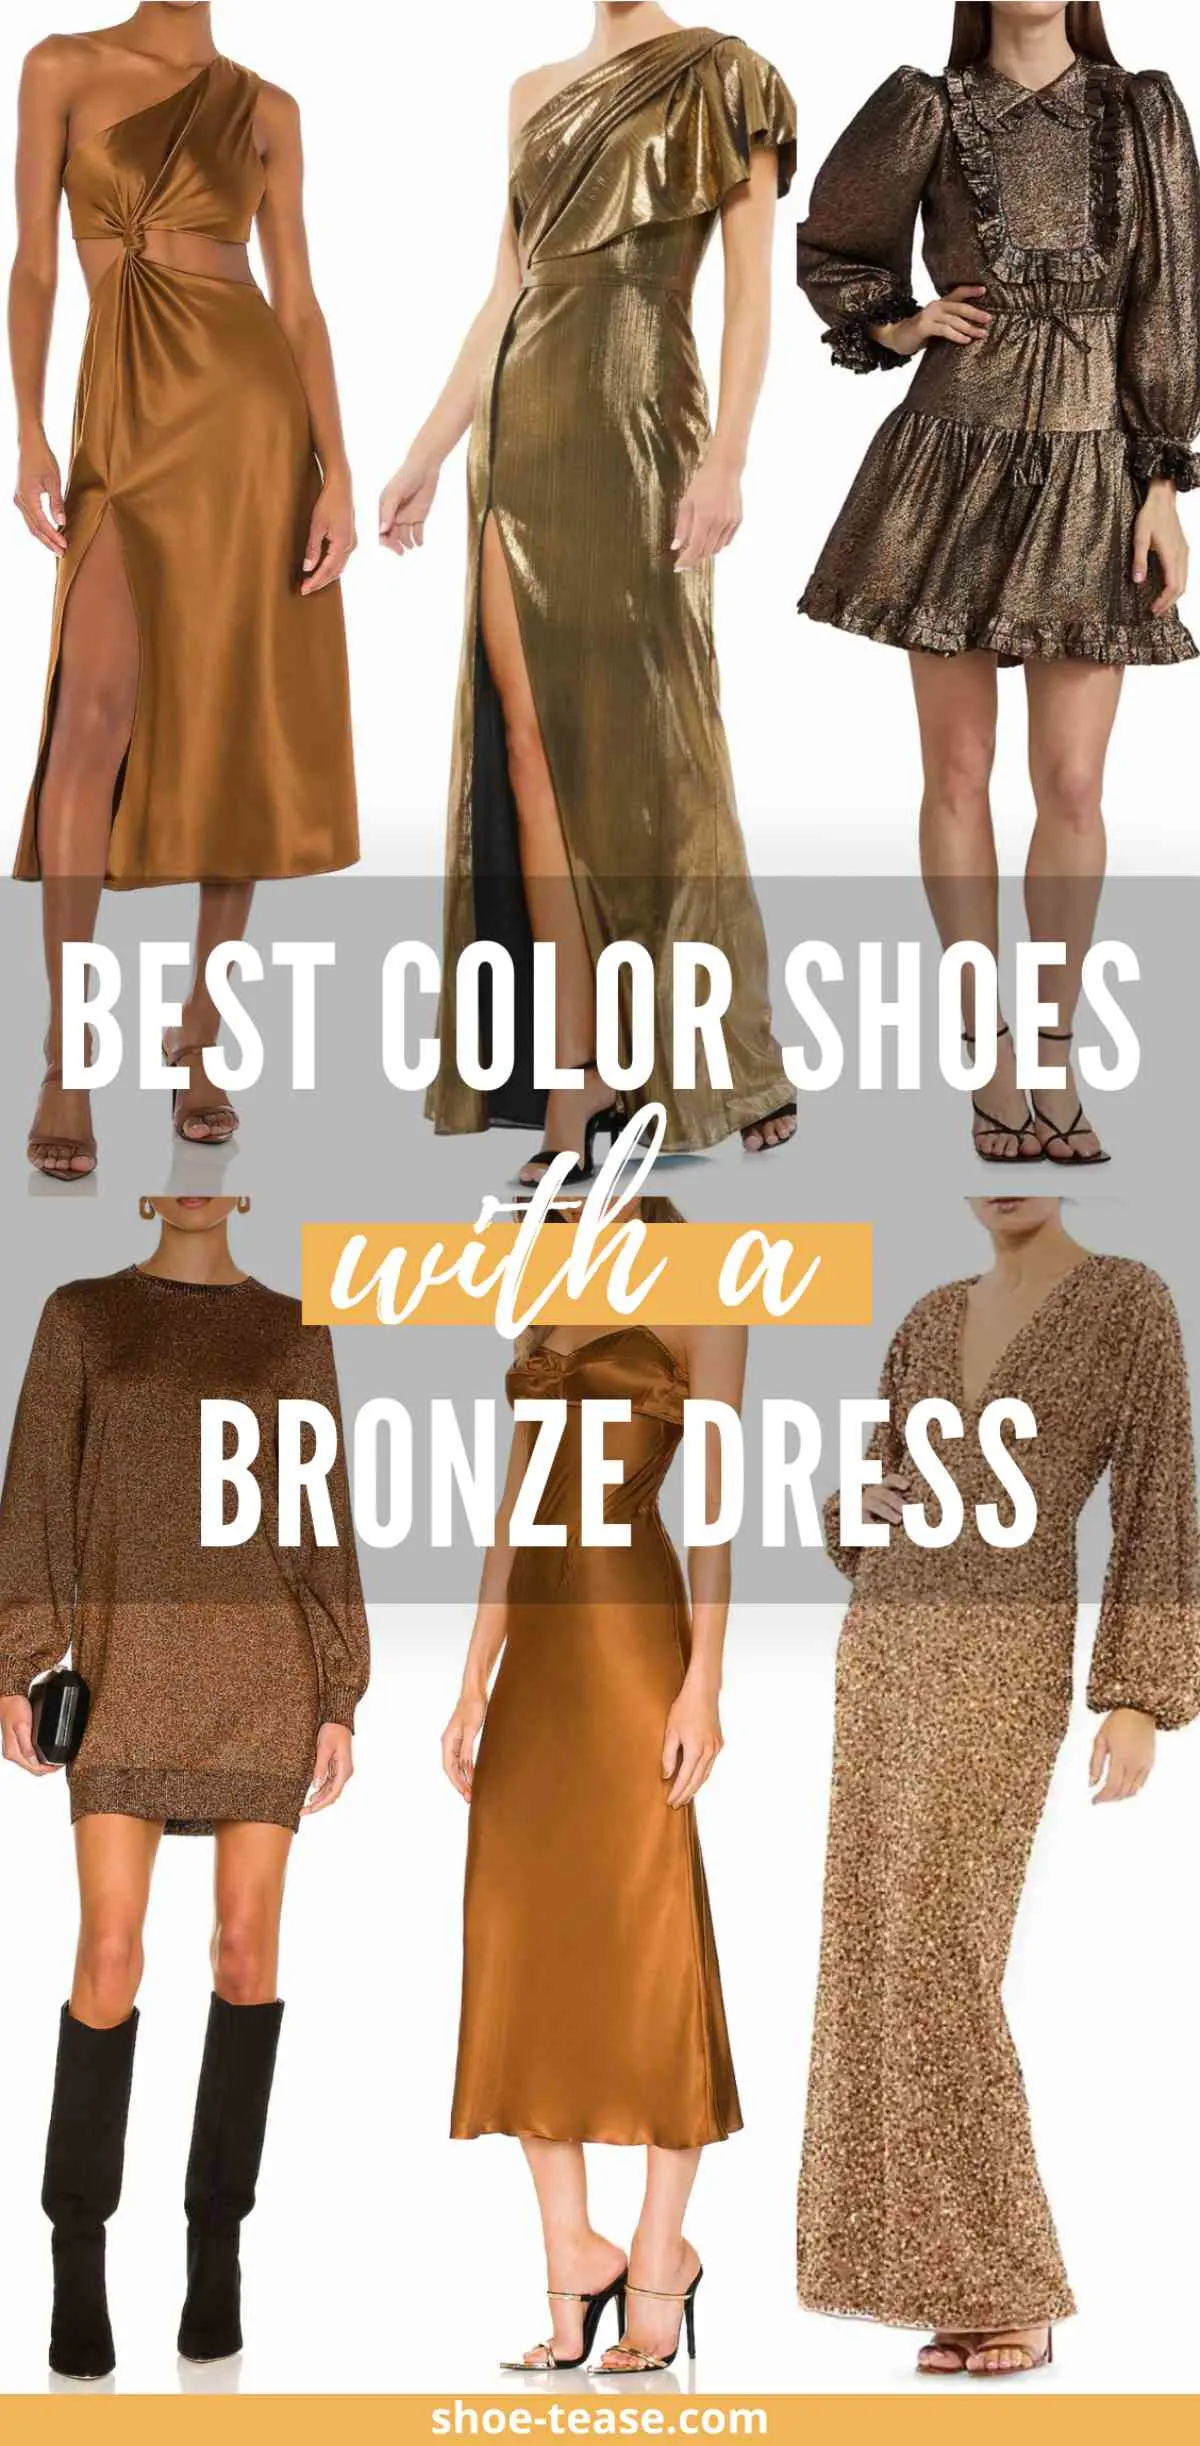 6 women wearing different styles and color shoes that match bronze dresses.